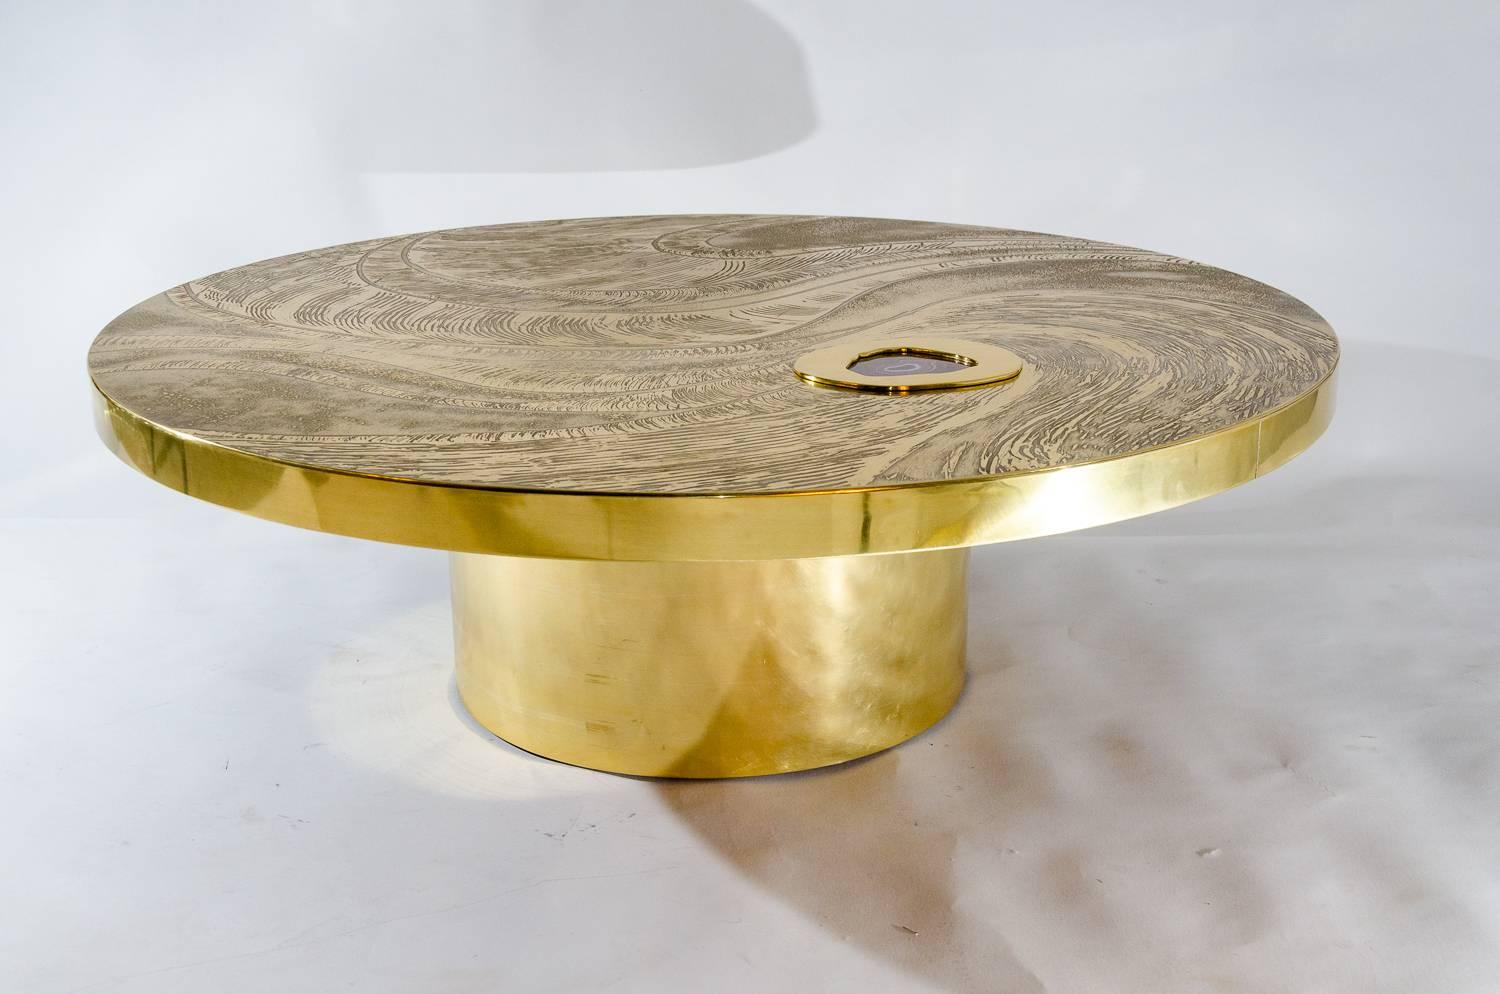 Etched brass coffee table inlay agate by VDL, circa 1978, signed and dated V.VD.L. 78, perfect conditions, new polish.